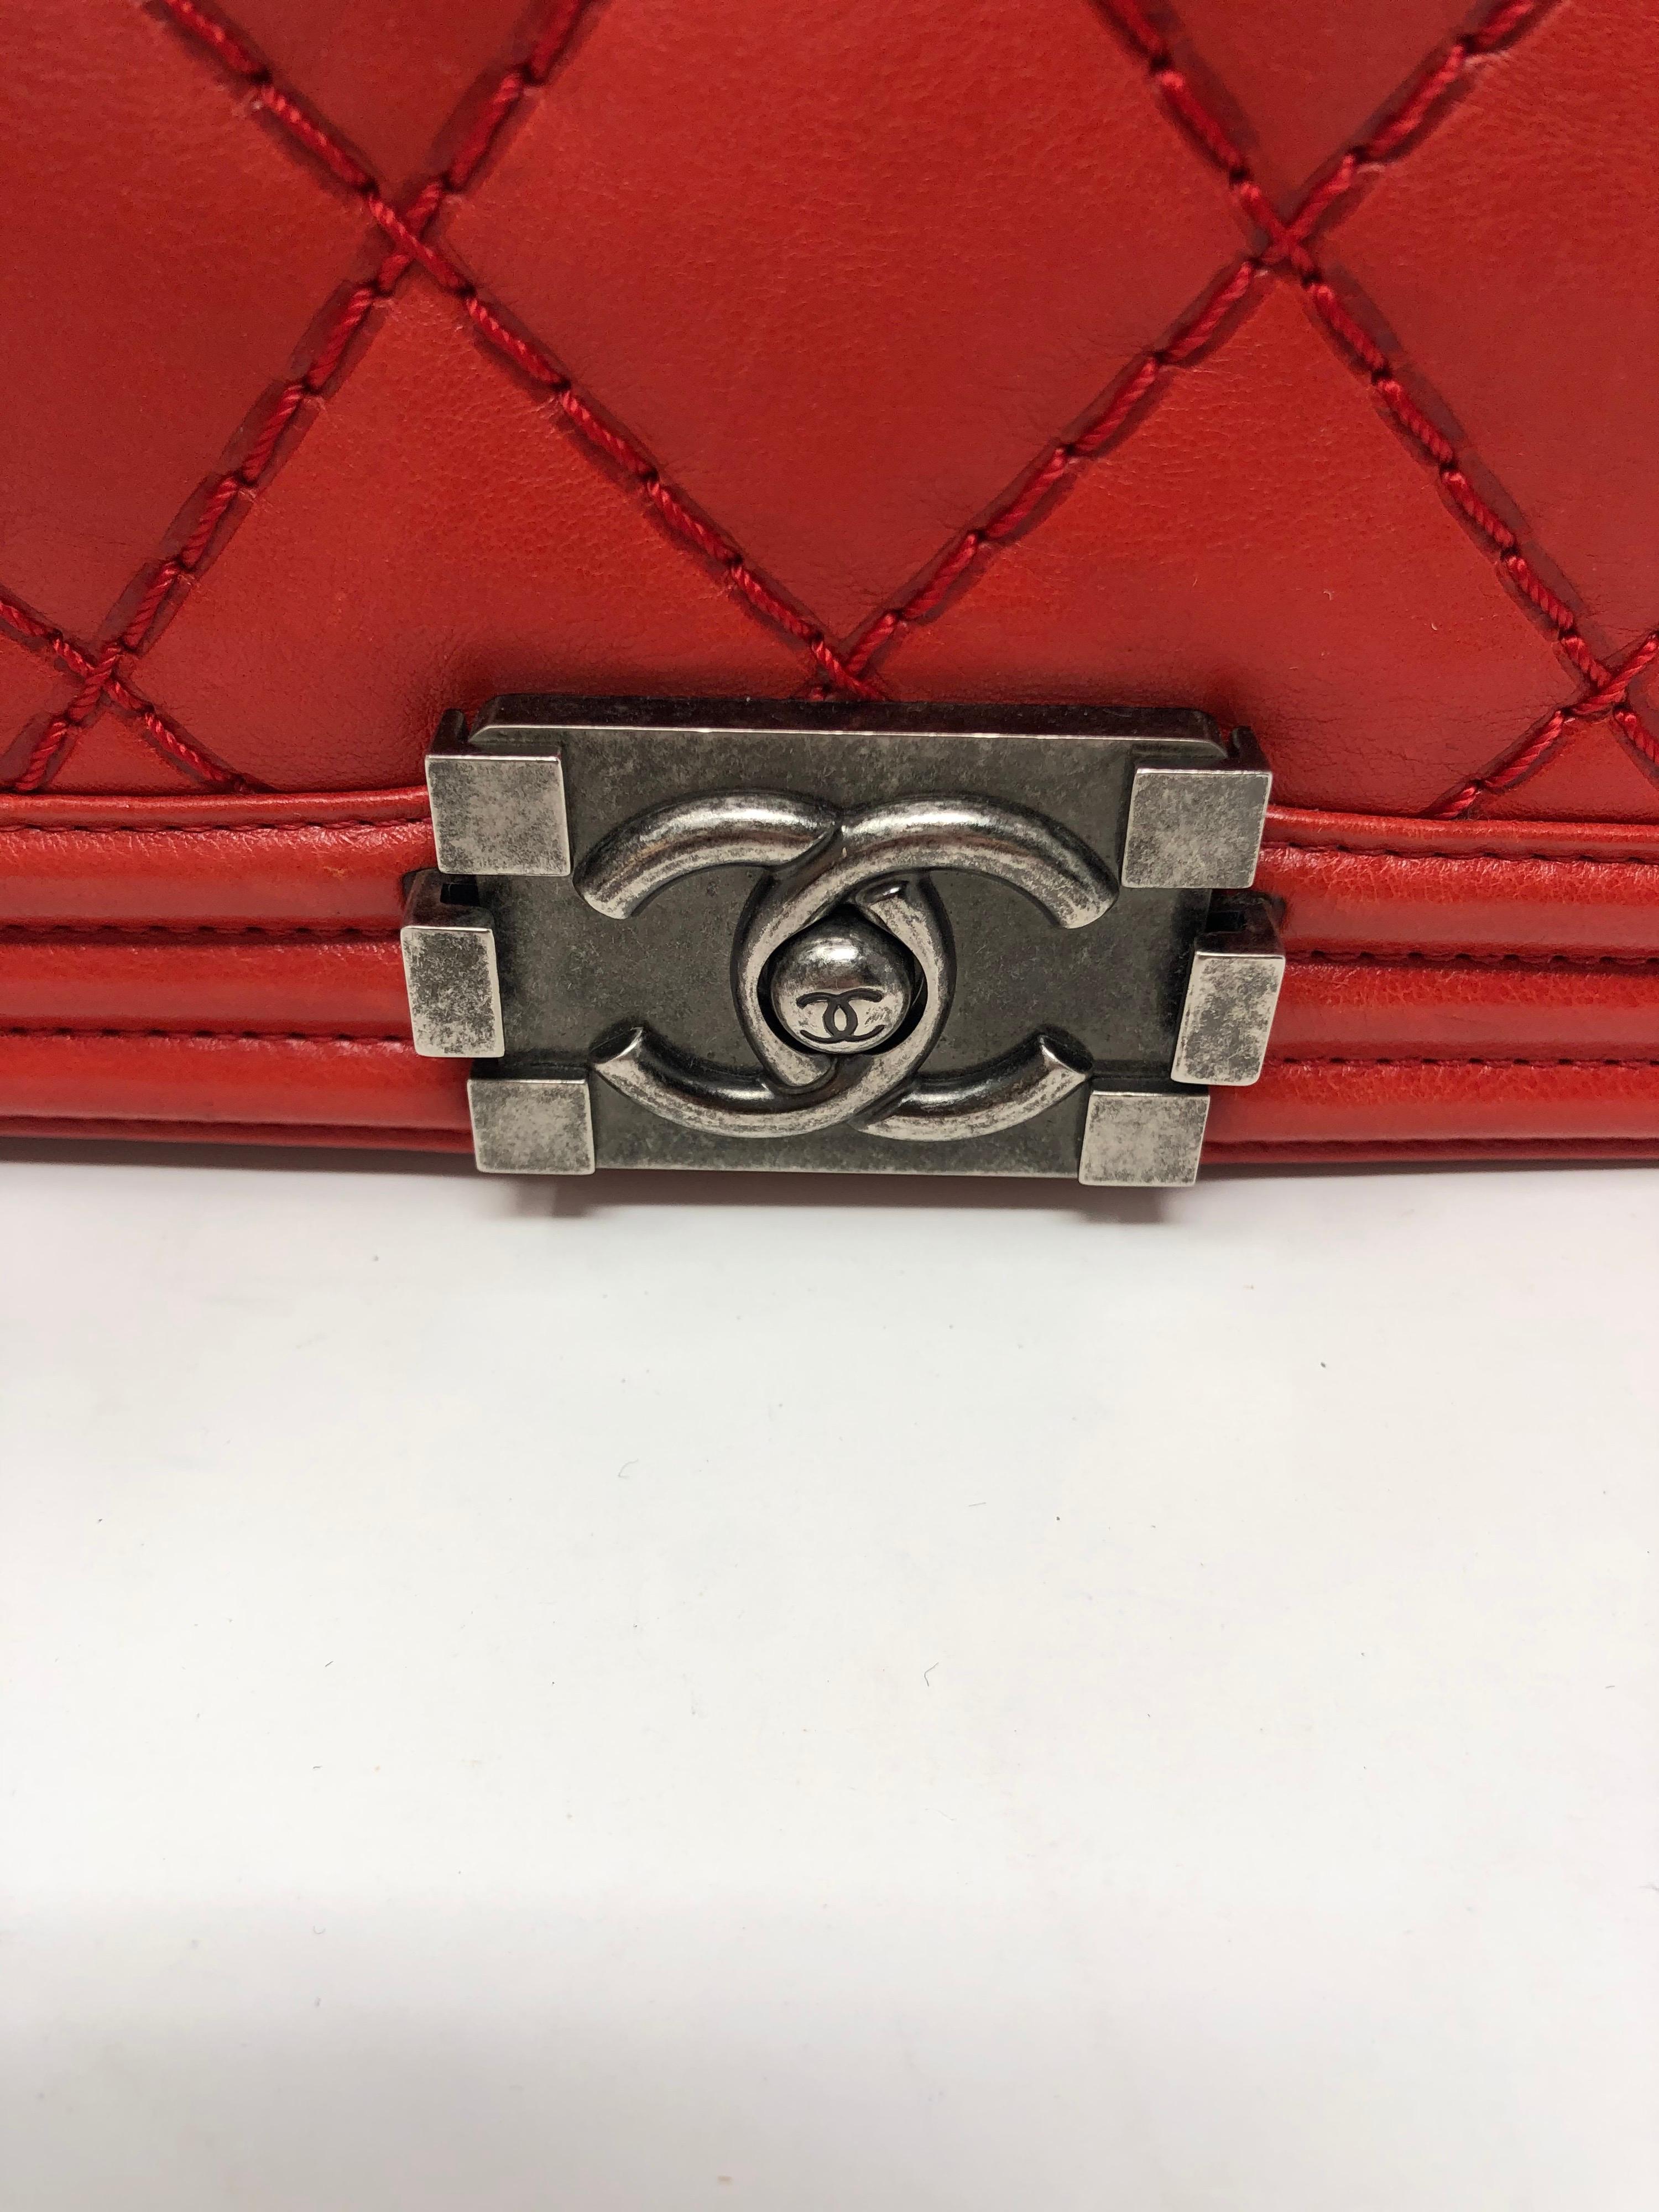 Chanel Red Boy Bag. Medium size. Mint condition. Bright red leather with antique silver hardware. Guaranteed authentic. 